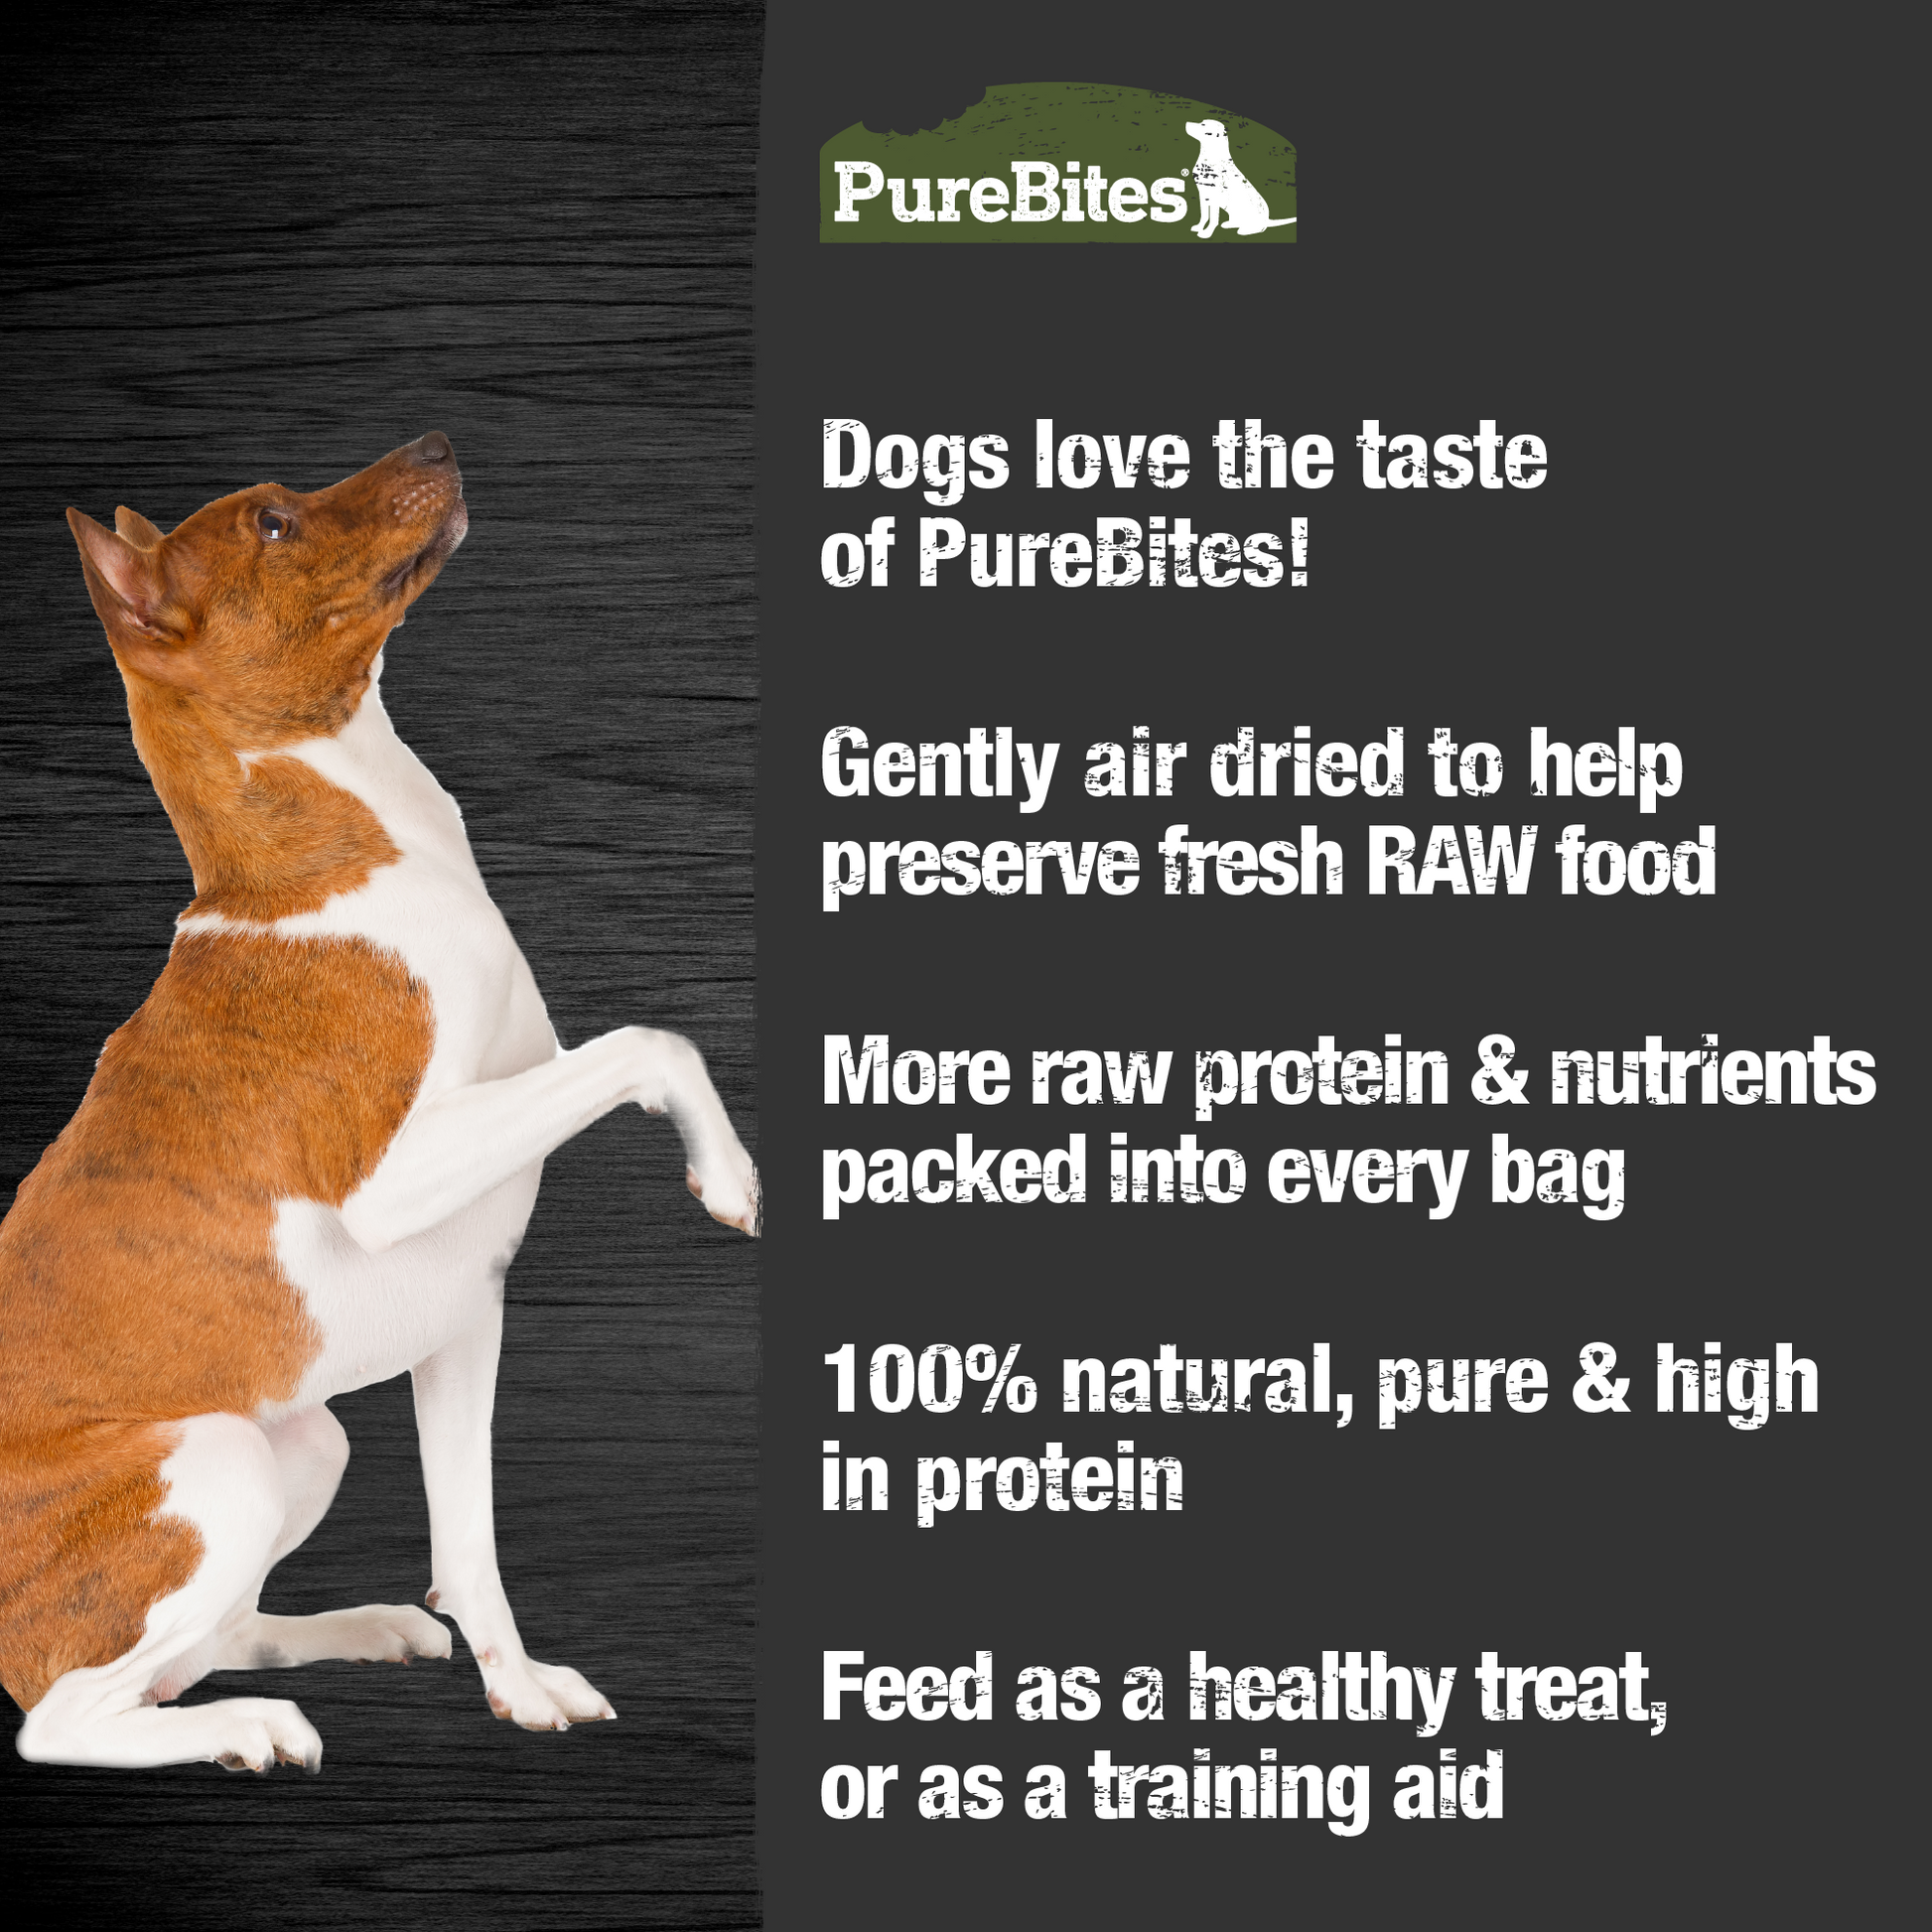 Made fresh & pure means more RAW protein and nutrients packed into every bag. Our beef jerky is delicately air dried to help preserve its RAW taste, and nutrition, and mirror a dog’s ancestral diet.